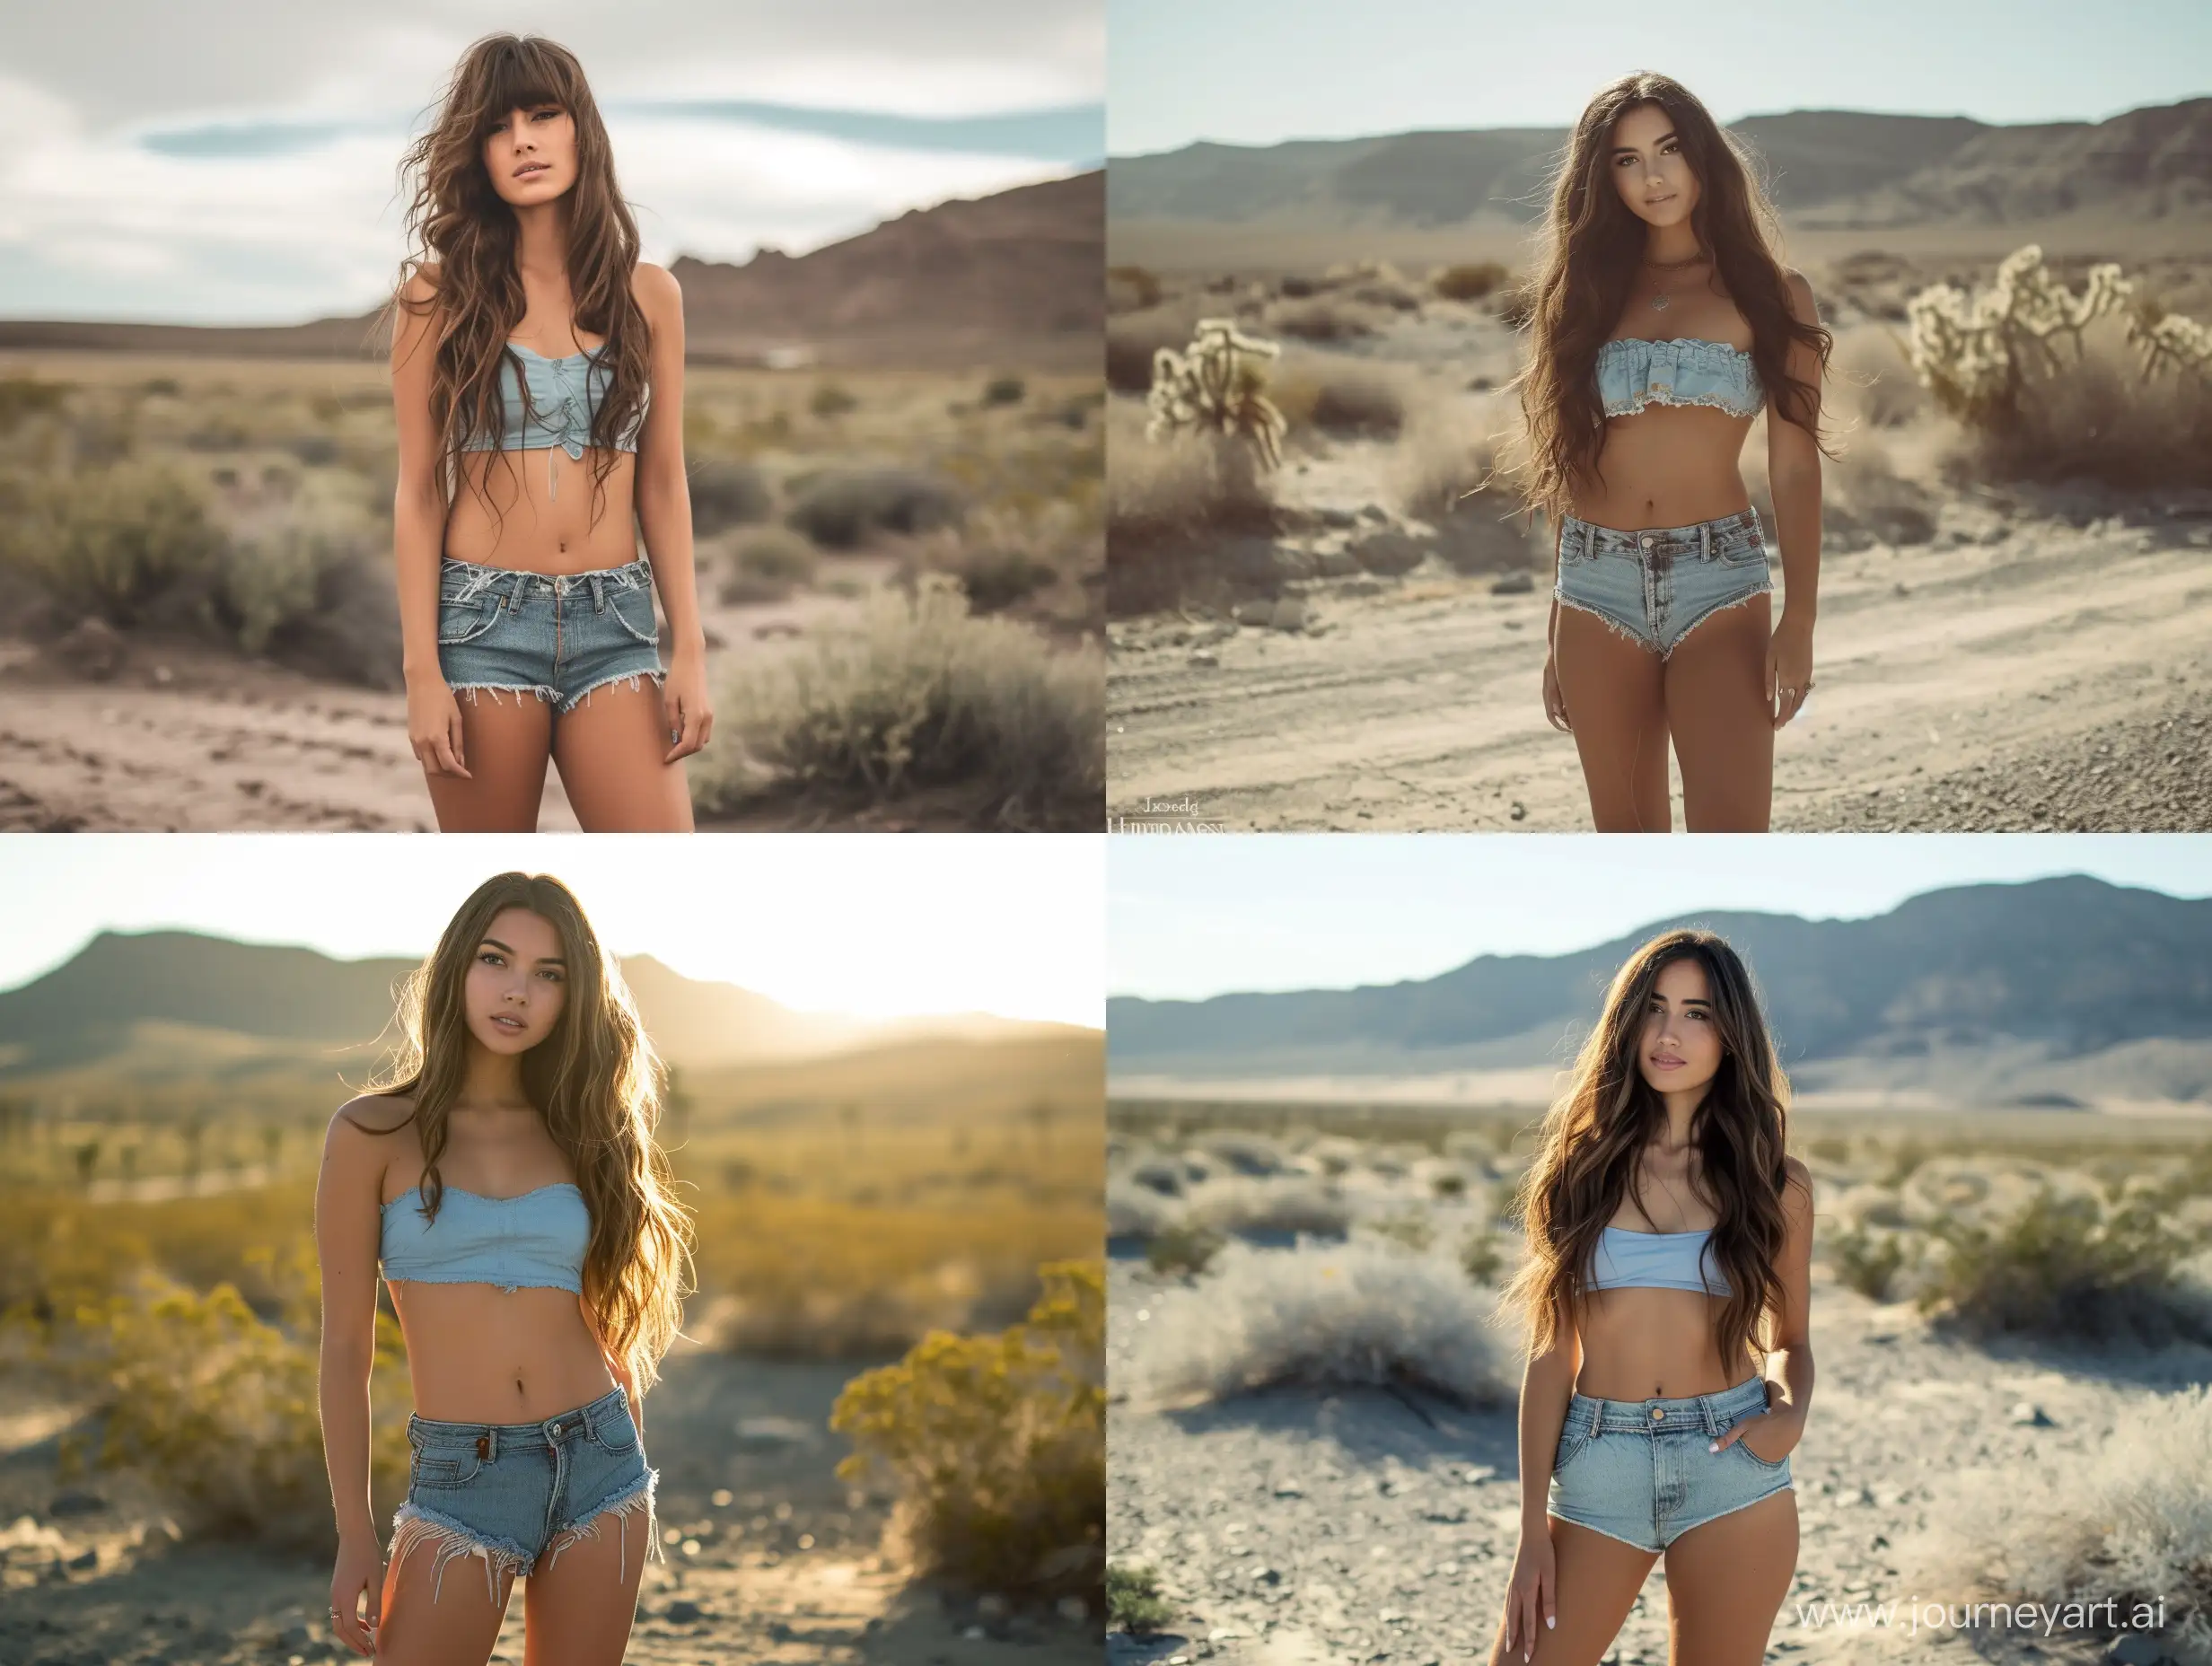 beautiful spanish woman standing in desert valley, wearing shorts and short blue top, long brown wavy hair, 